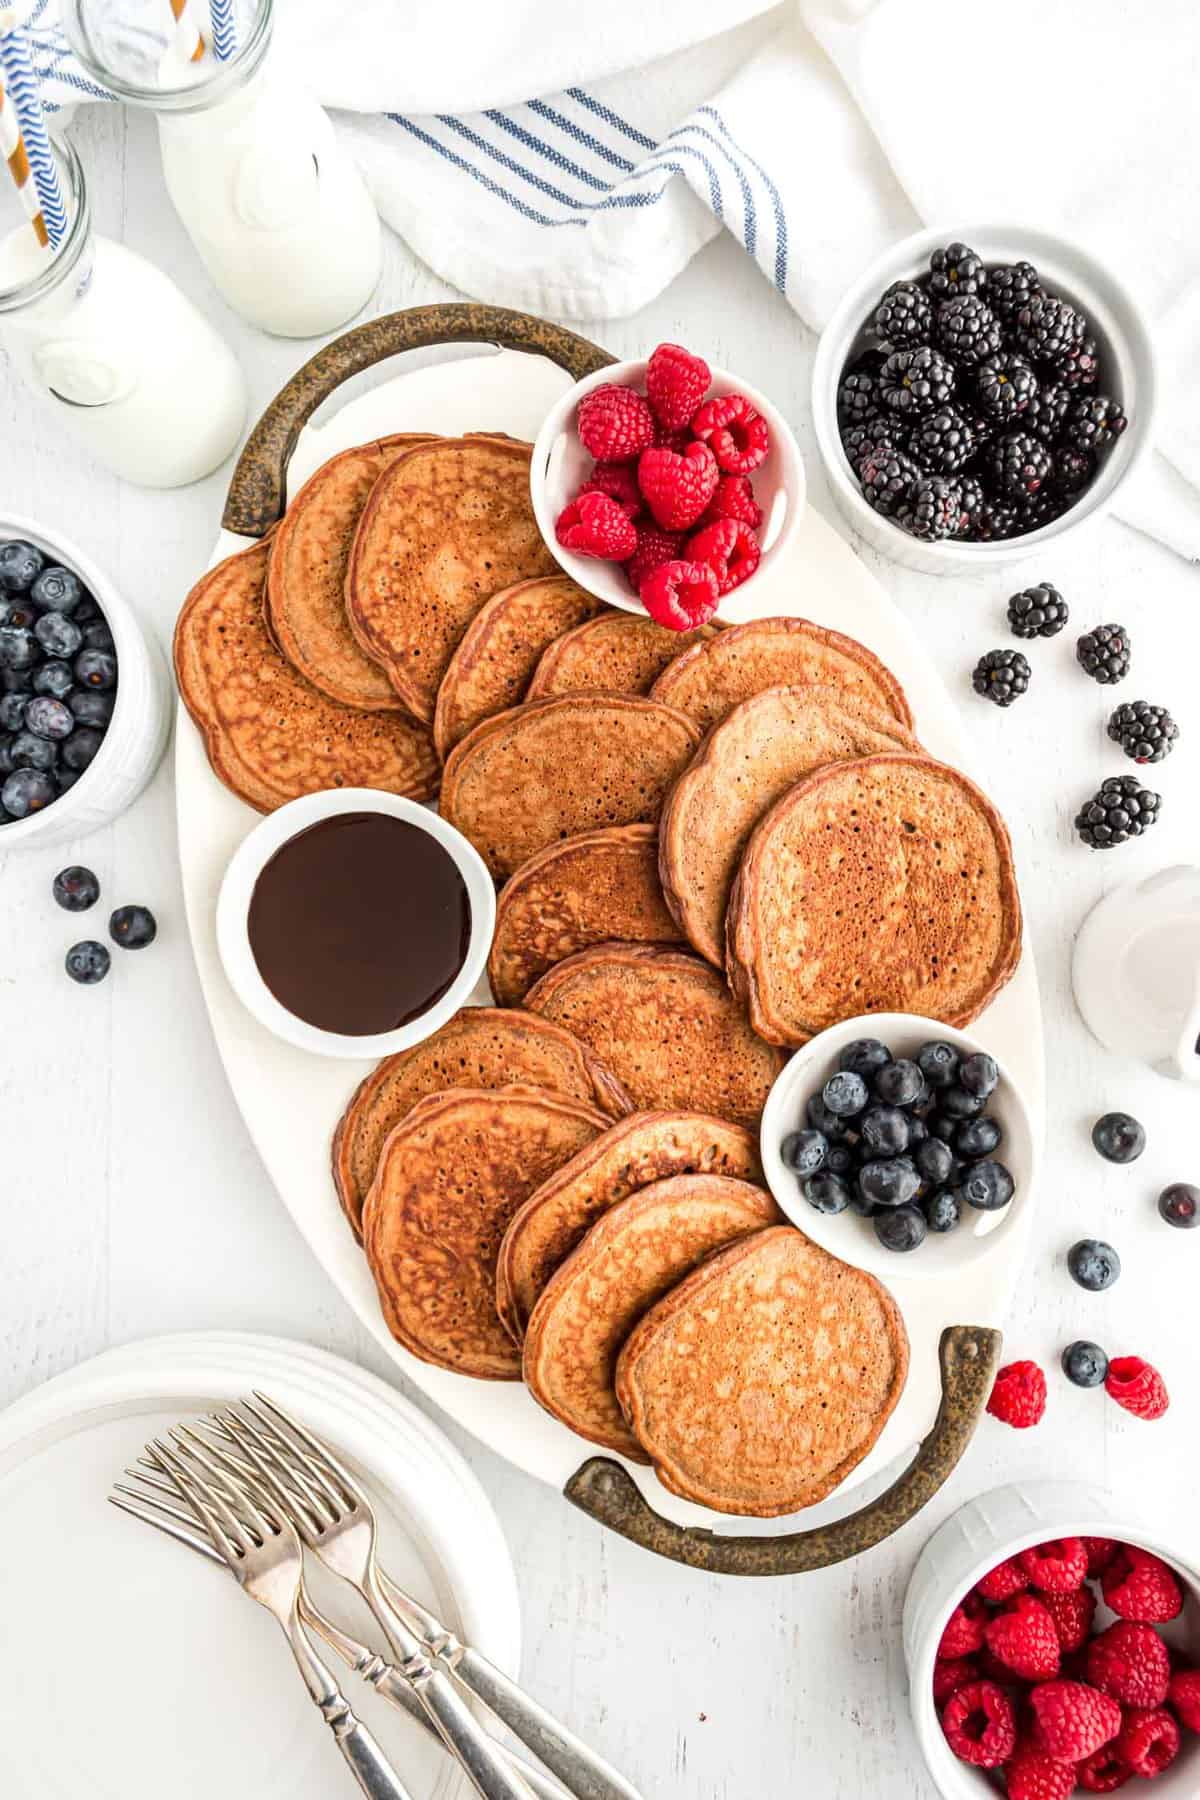 Chocolate pancakes arranged on a platter with fresh berries.